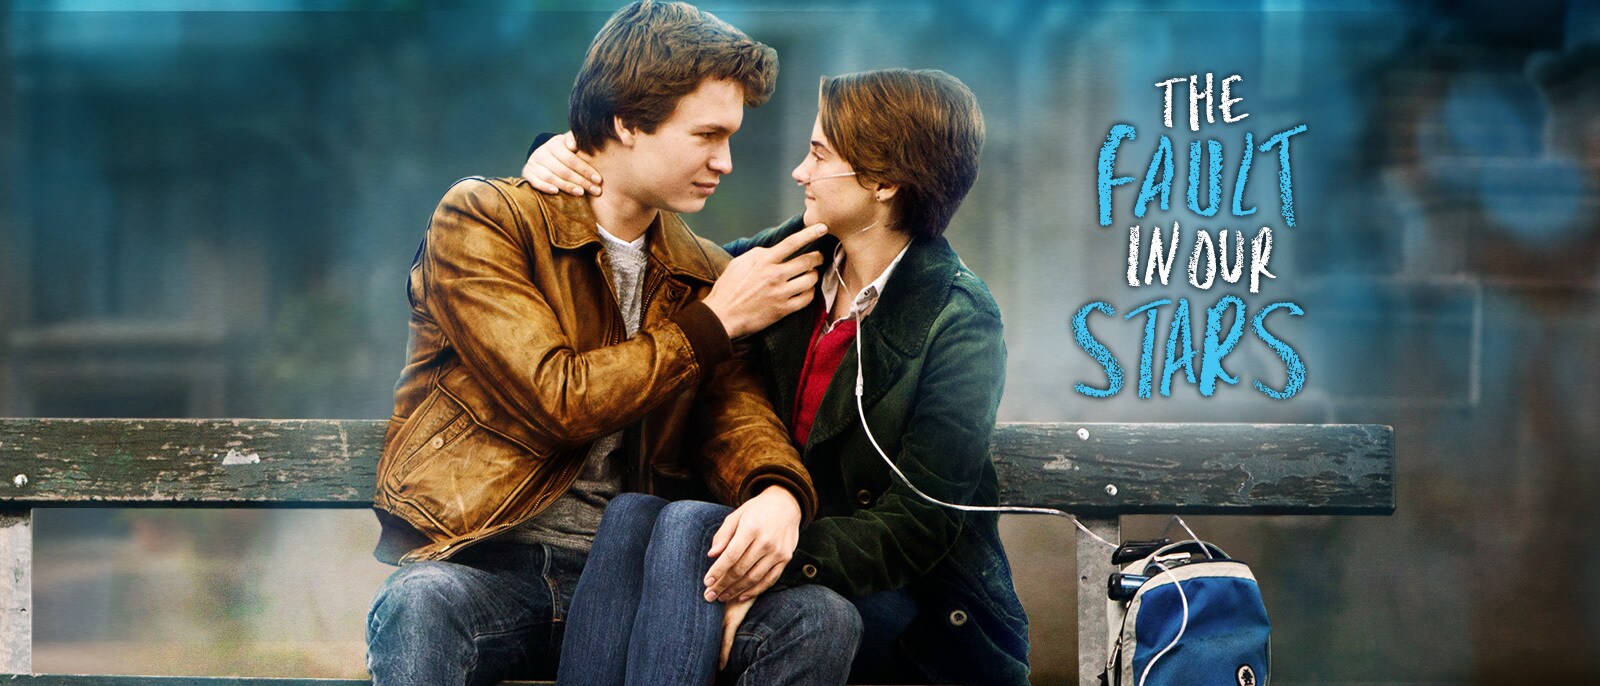 is the fault in our stars on netflix